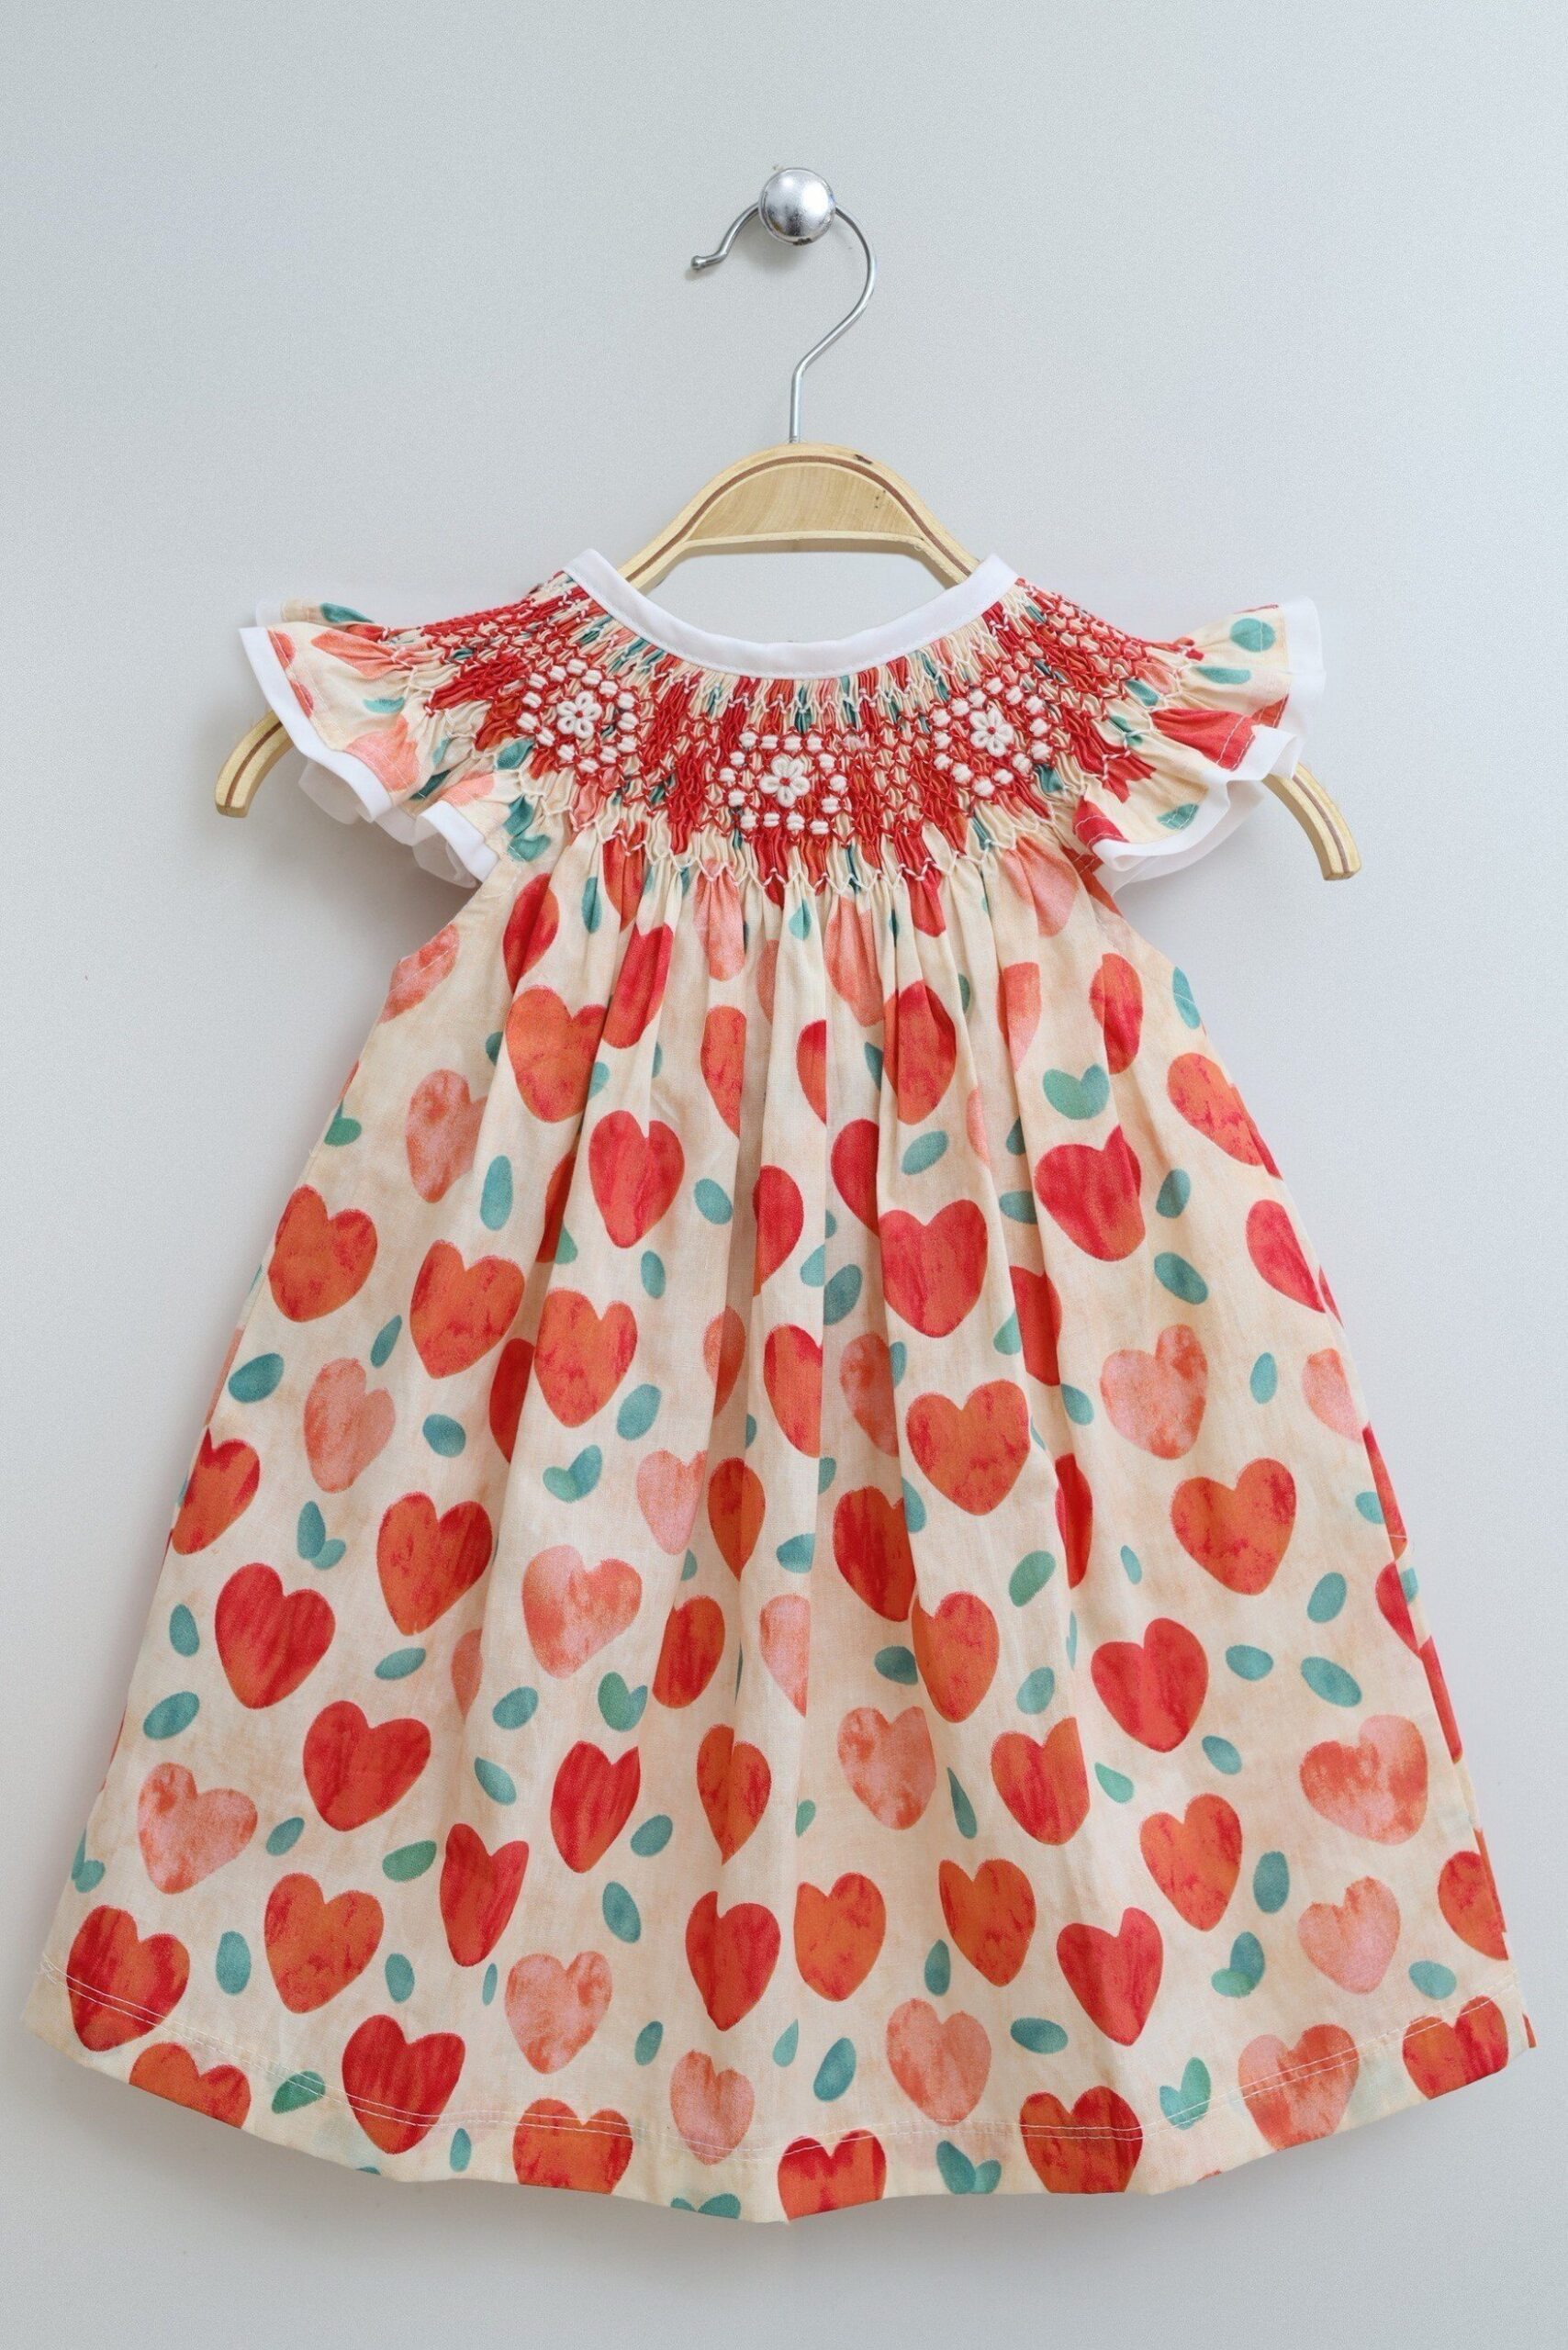 Simple Smocked Dress For Girls With Heart Motifs